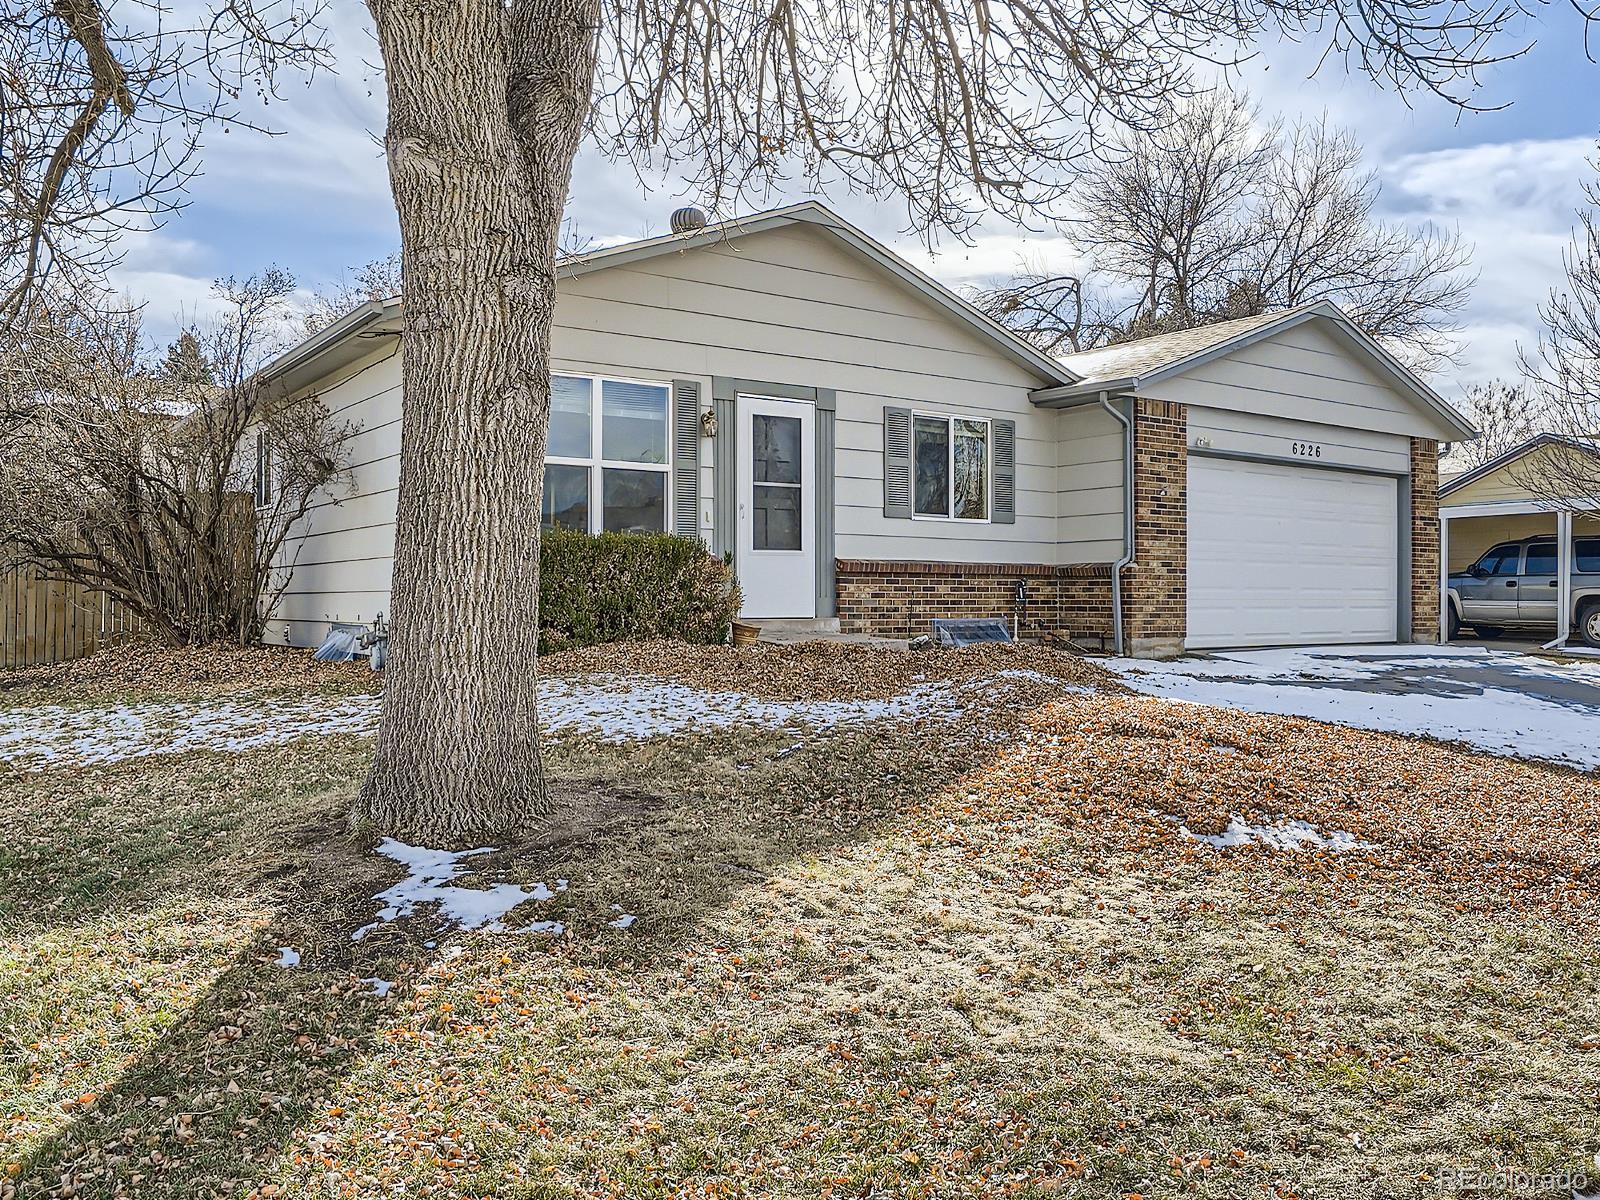 6226 W 75th Place, arvada MLS: 9918242 Beds: 3 Baths: 2 Price: $525,000